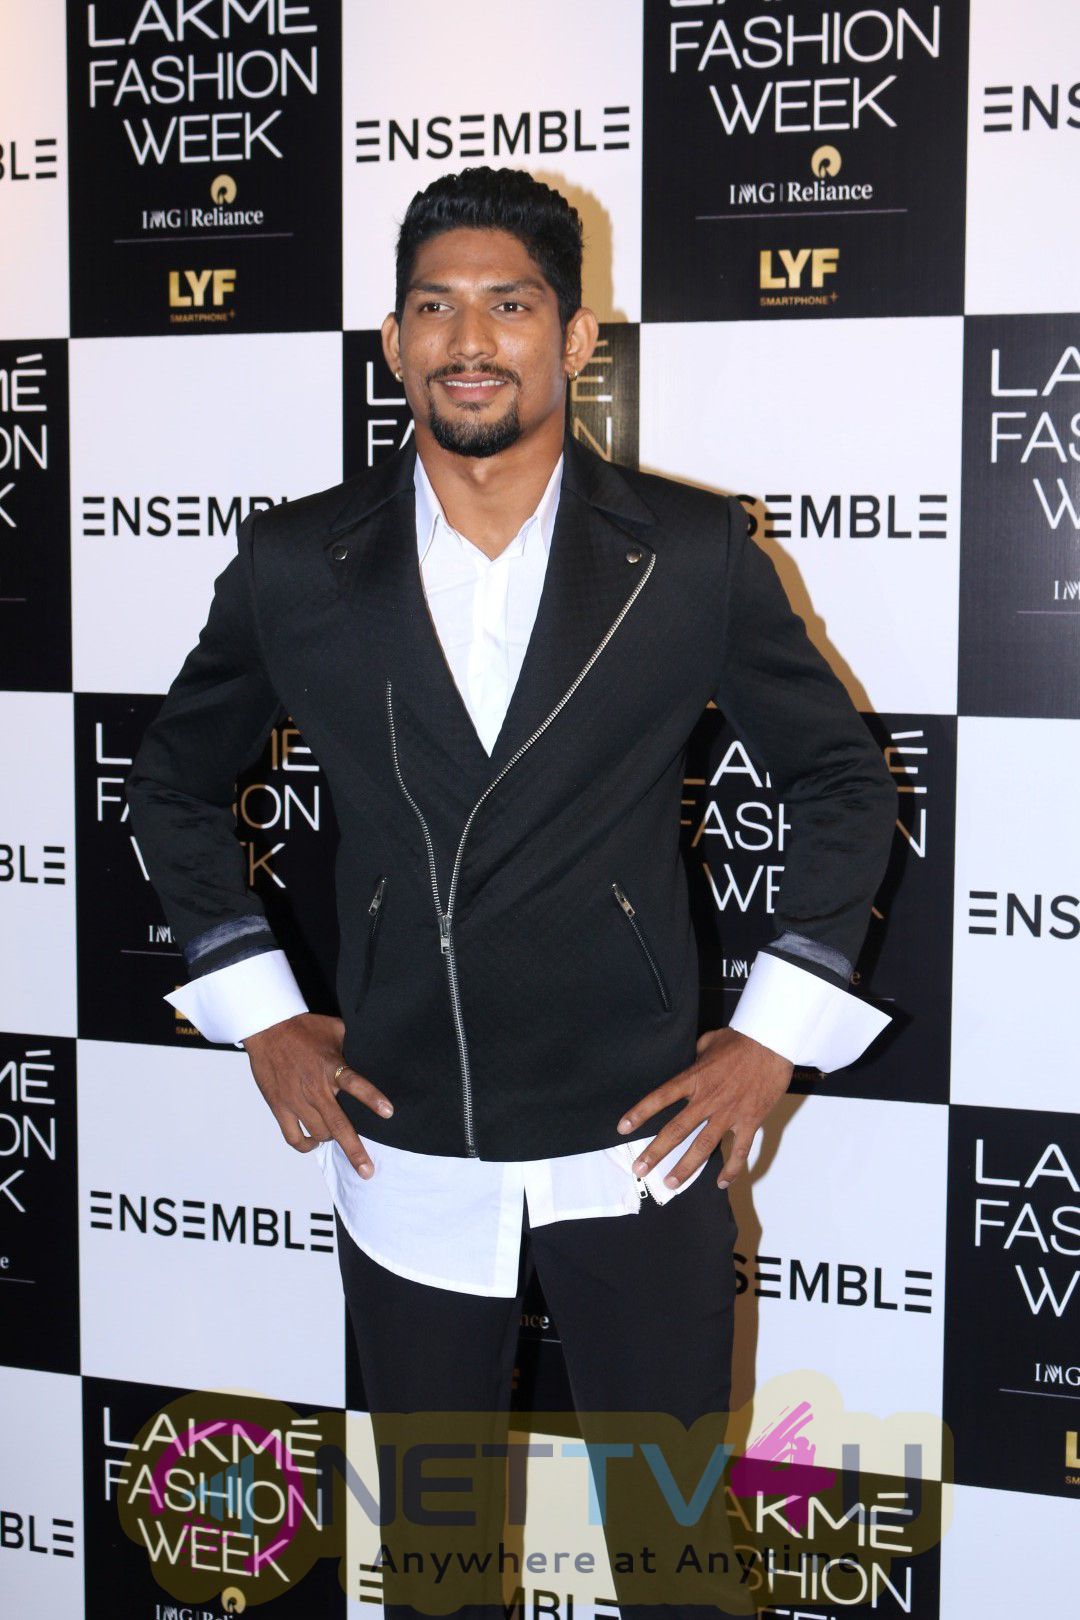 Lakme Fashion Week And Ensemble Invites You For A Exclusive Menswear Showcase By Selected Designers Photos Hindi Gallery